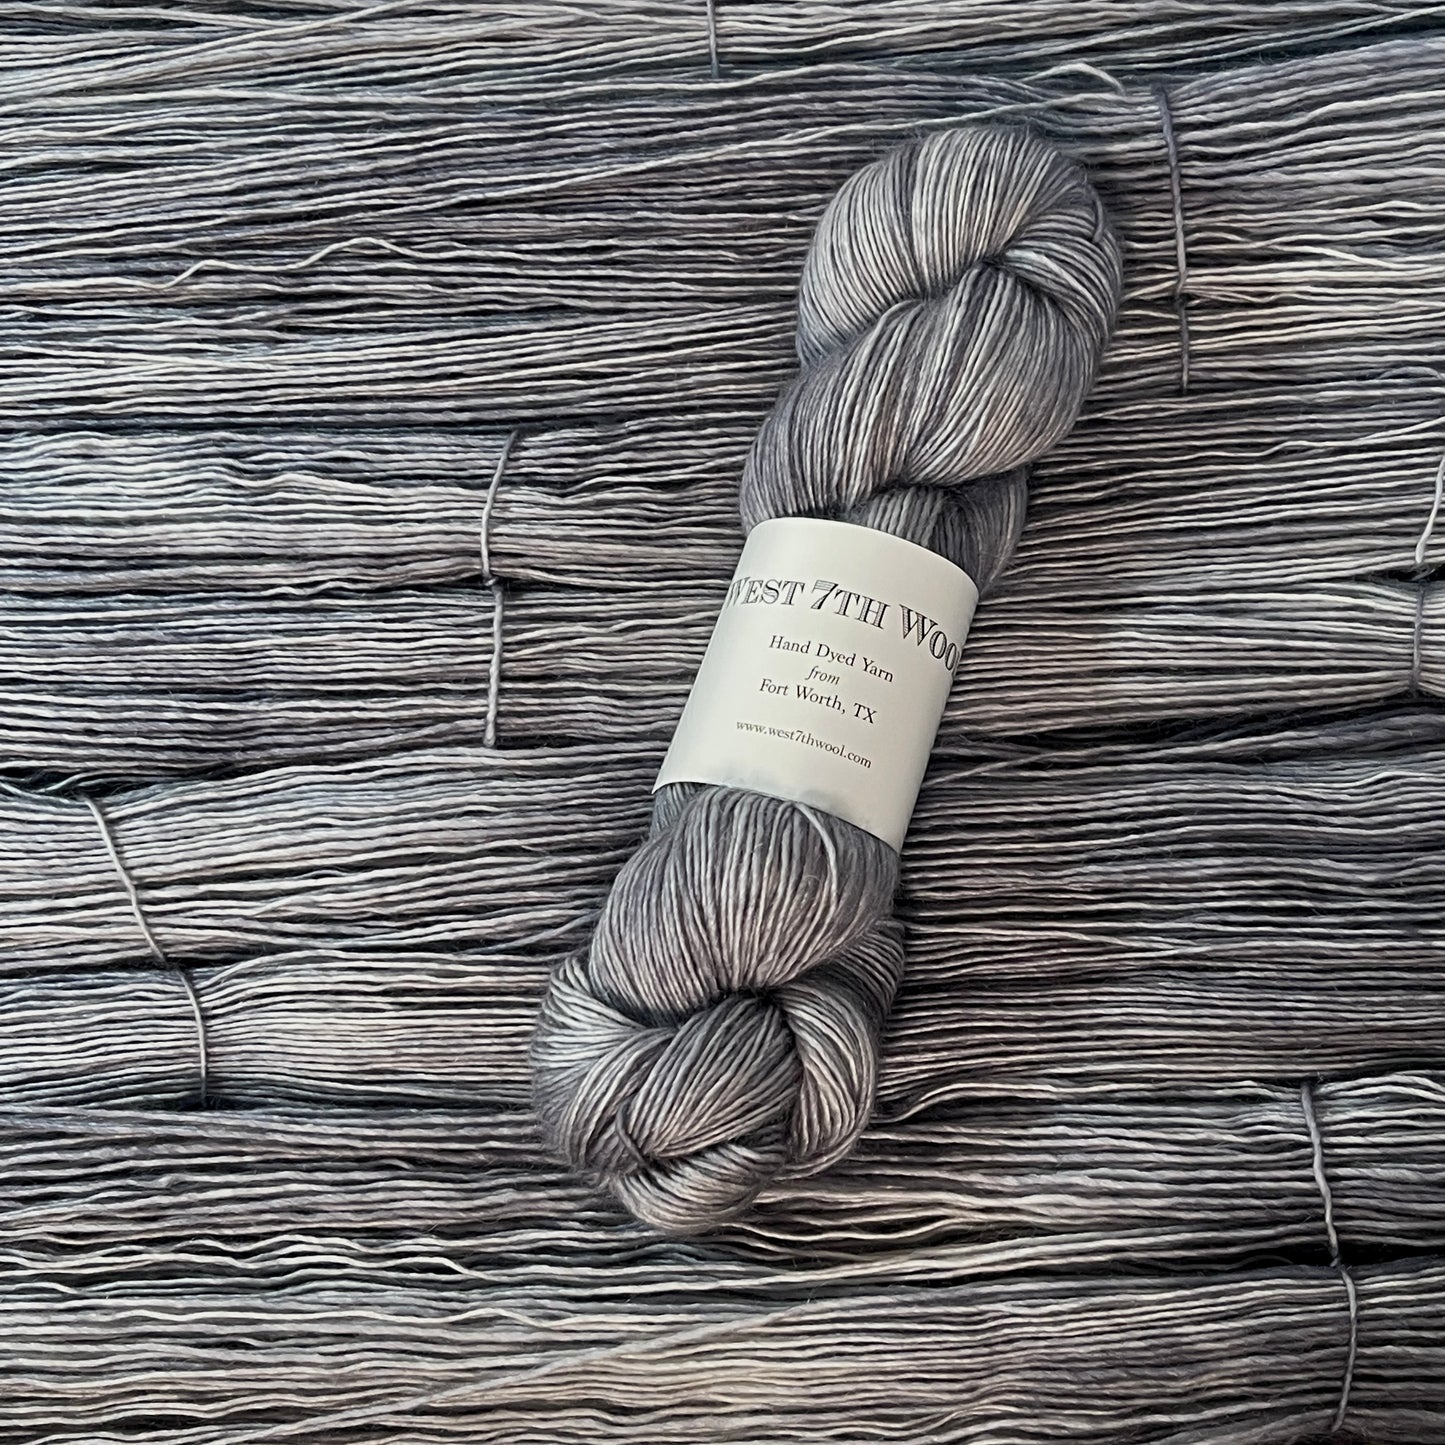 West 7th Wool - 7th St Singles + Mohair